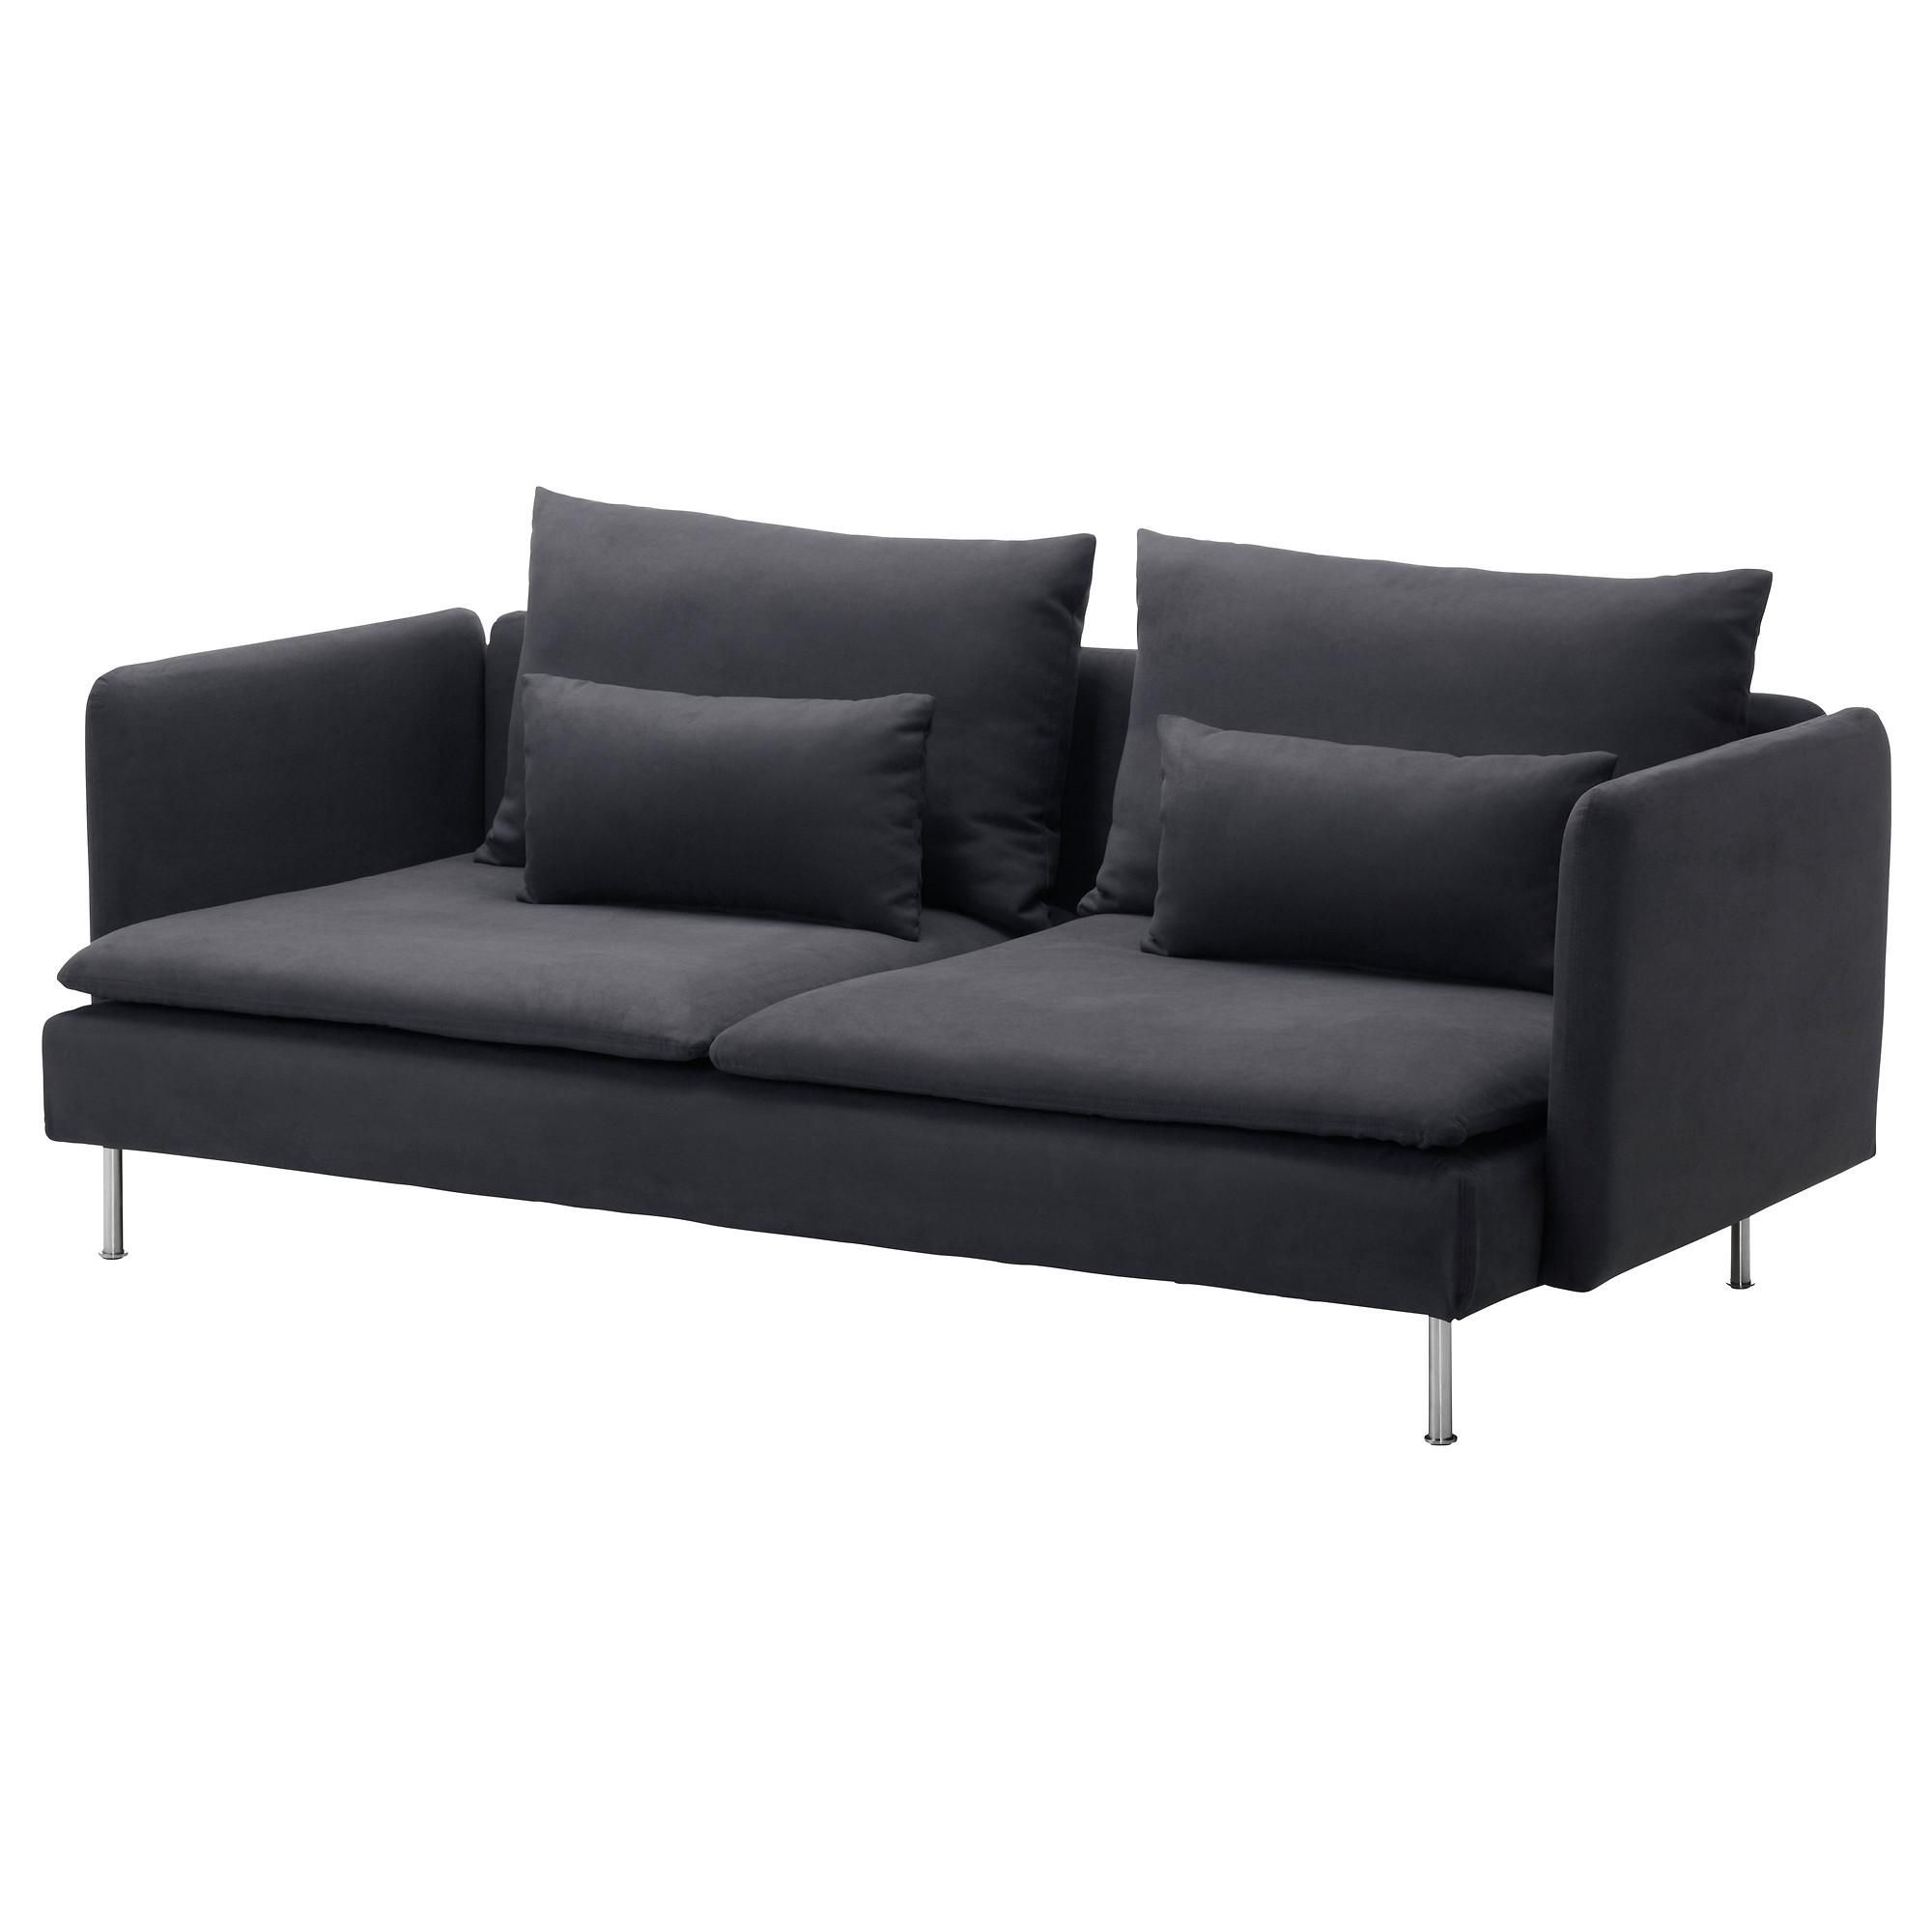 Sectional Sofas & Couches – Ikea In Manstad Sofa Bed Ikea (View 15 of 20)